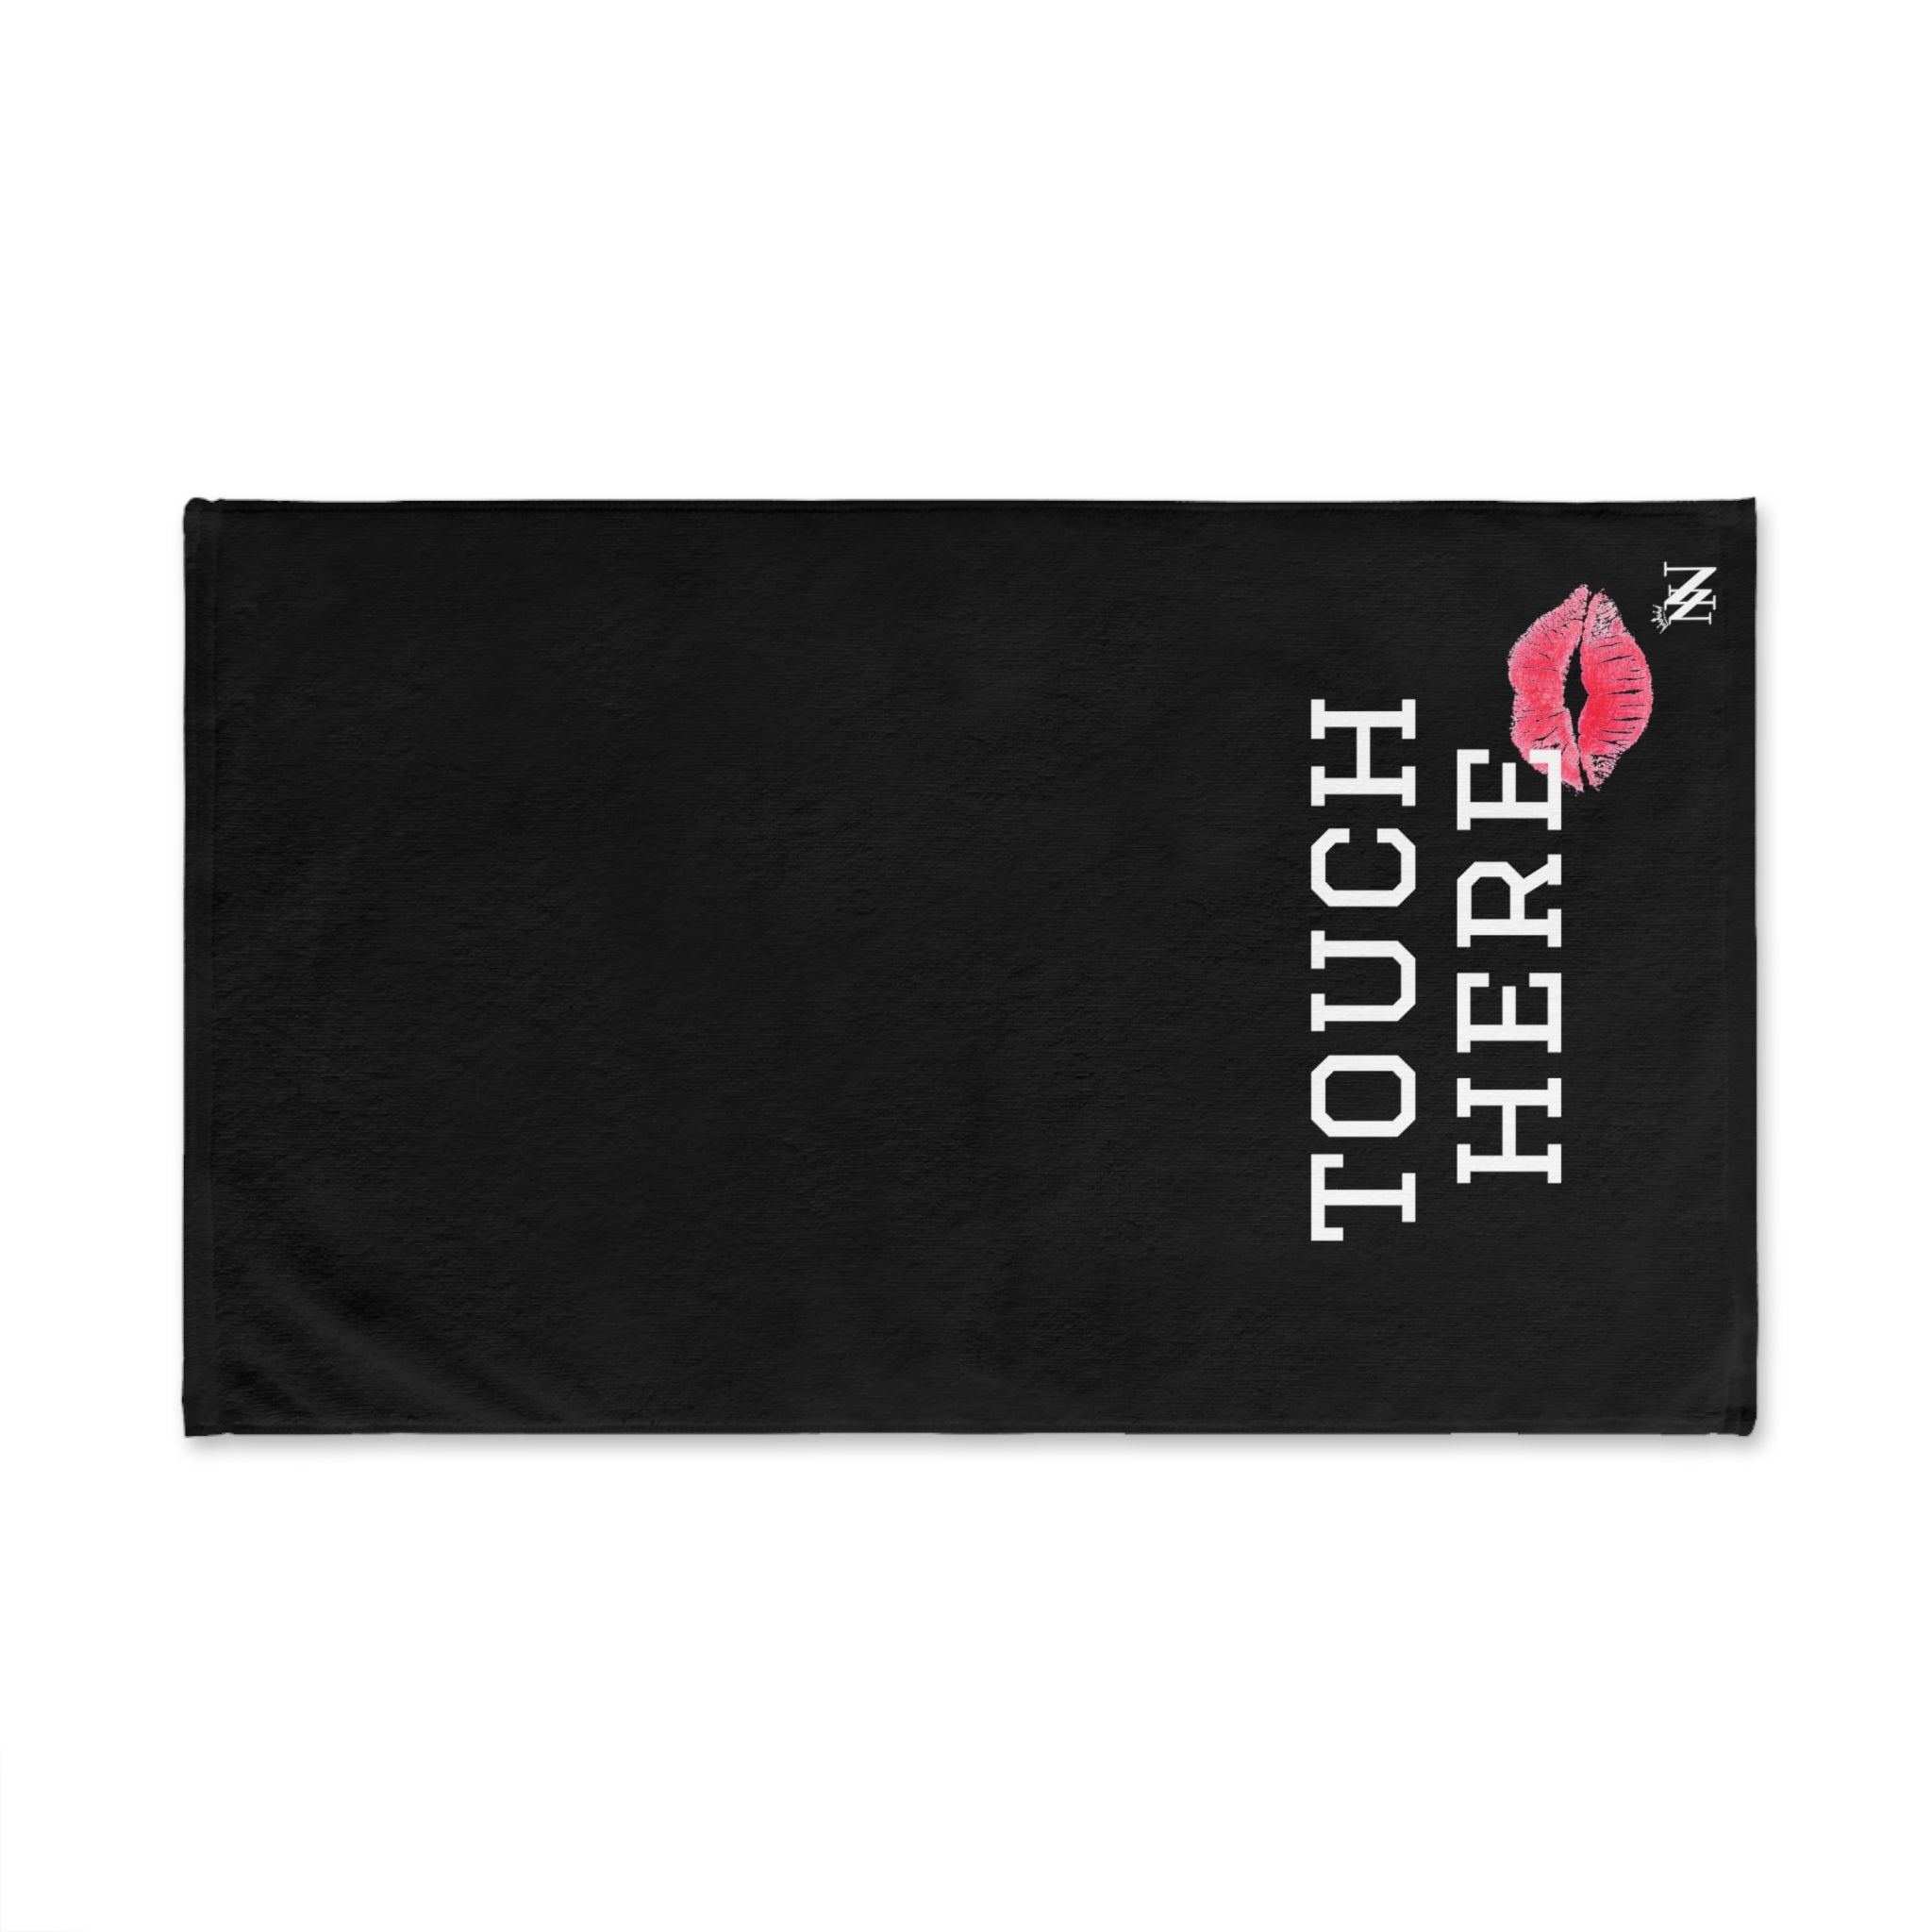 Touch Here Kiss Lip Black | Sexy Gifts for Boyfriend, Funny Towel Romantic Gift for Wedding Couple Fiance First Year 2nd Anniversary Valentines, Party Gag Gifts, Joke Humor Cloth for Husband Men BF NECTAR NAPKINS